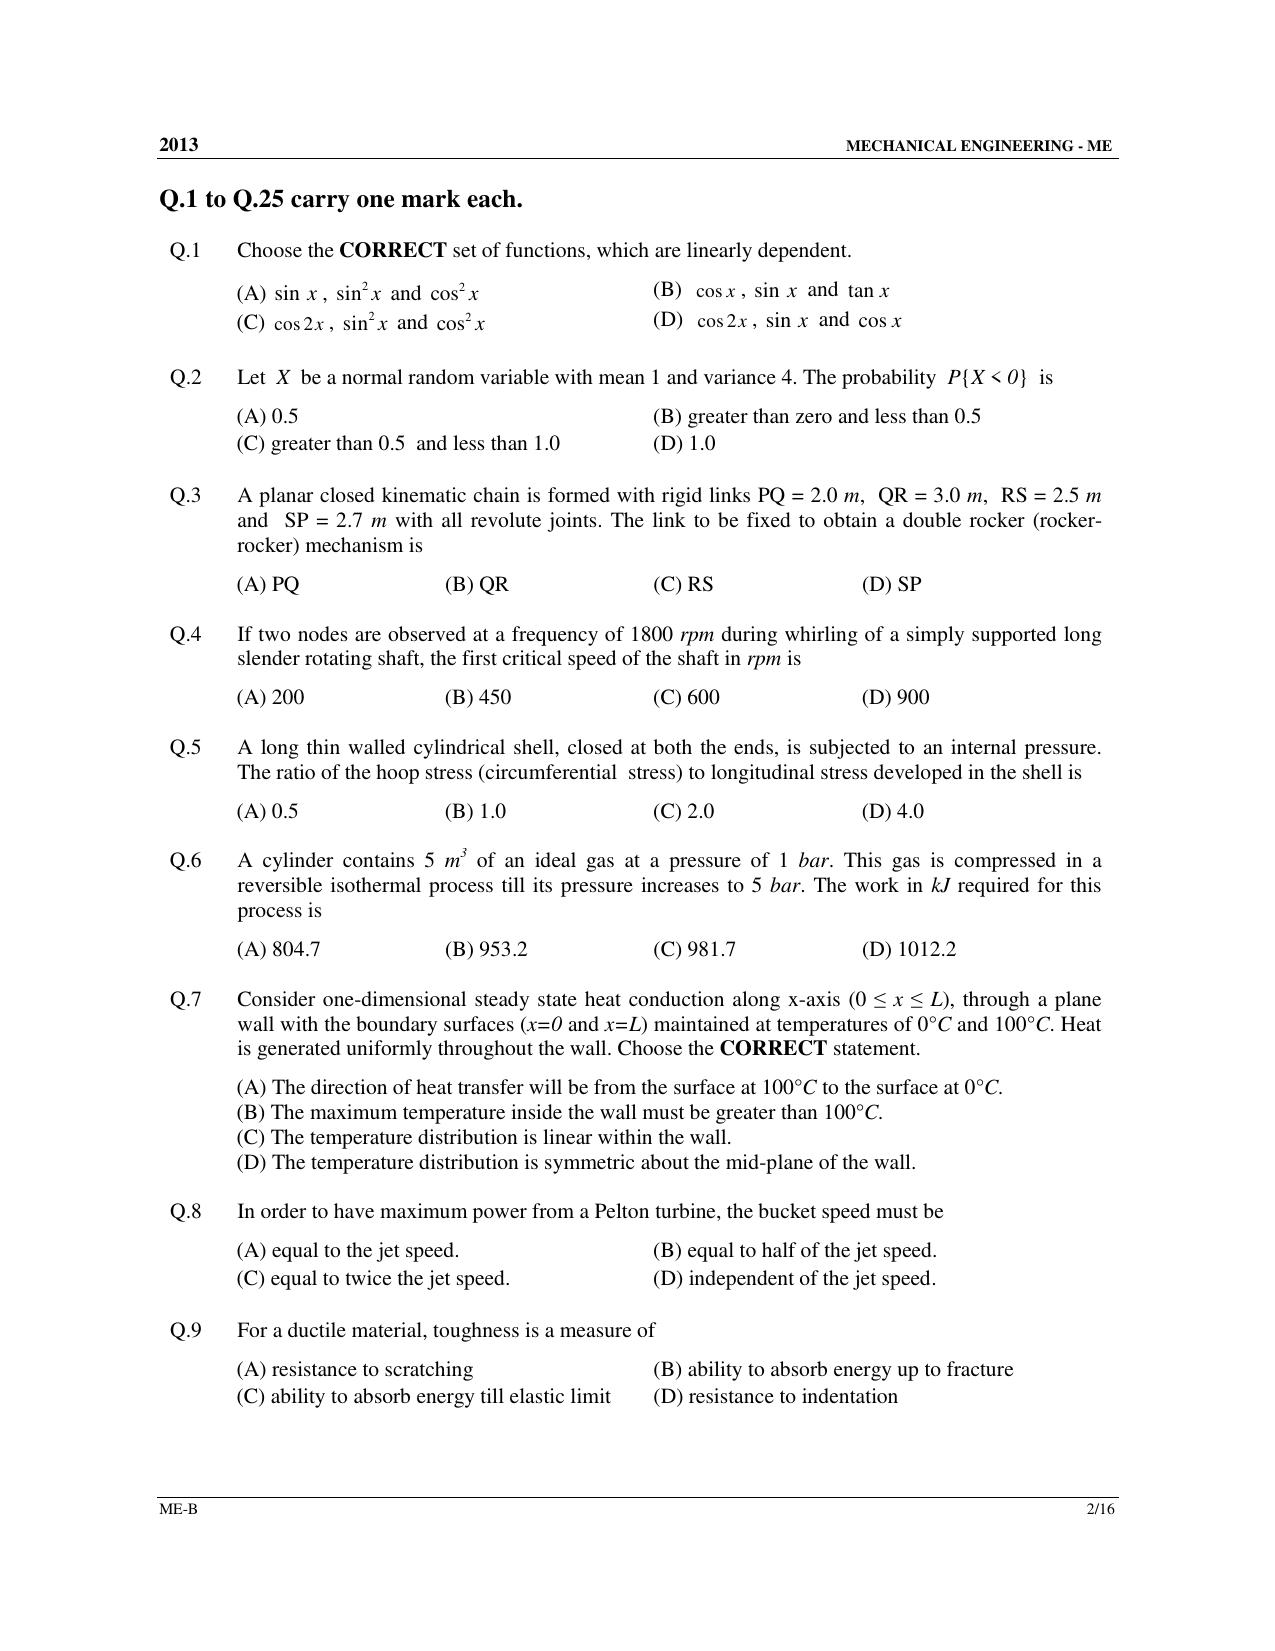 GATE 2013 Mechanical Engineering (ME) Question Paper with Answer Key - Page 17